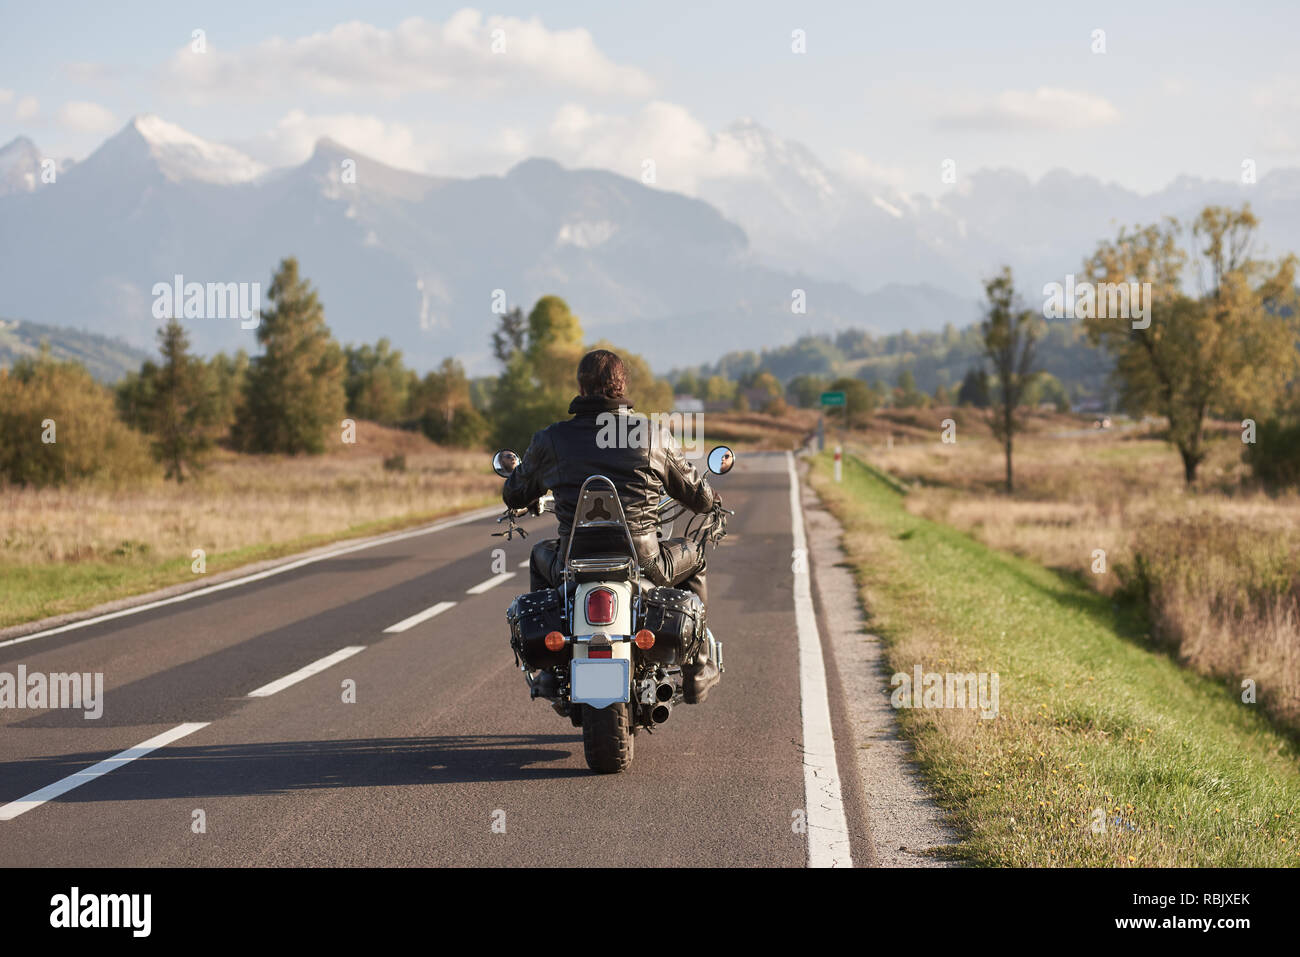 Back view of biker in black leather jacket riding motorcycle along road on blurred background of beautiful mountain range with snowy peaks, moving veh Stock Photo